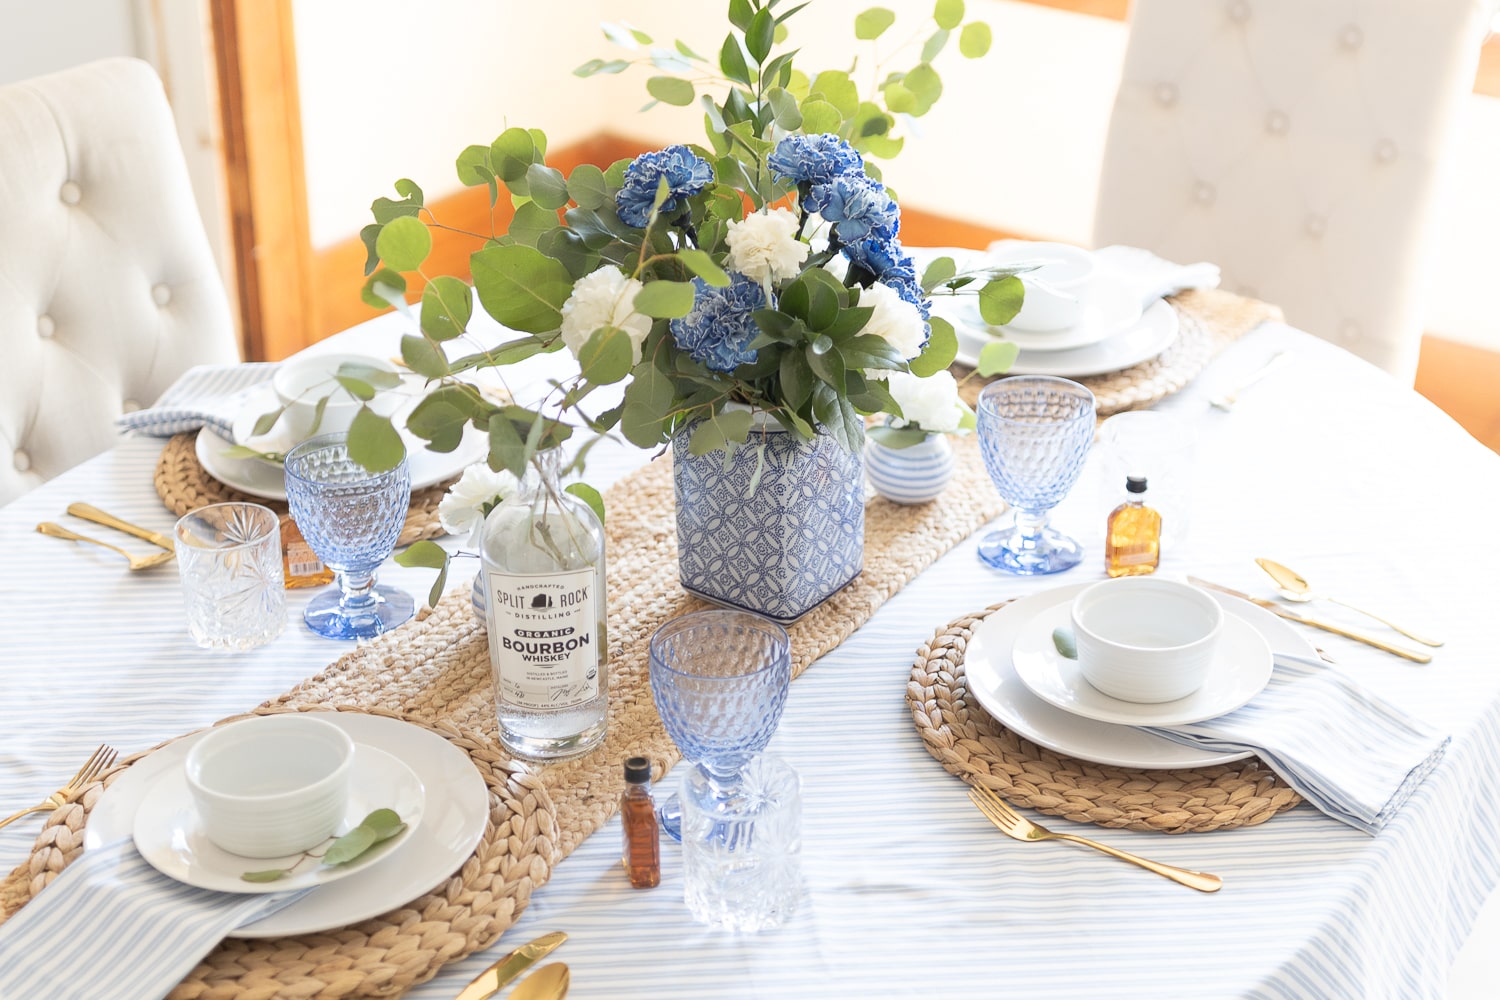 Attainable Father's Day table decoration ideas from blogger Stephanie Ziajka on Diary of a Debutante